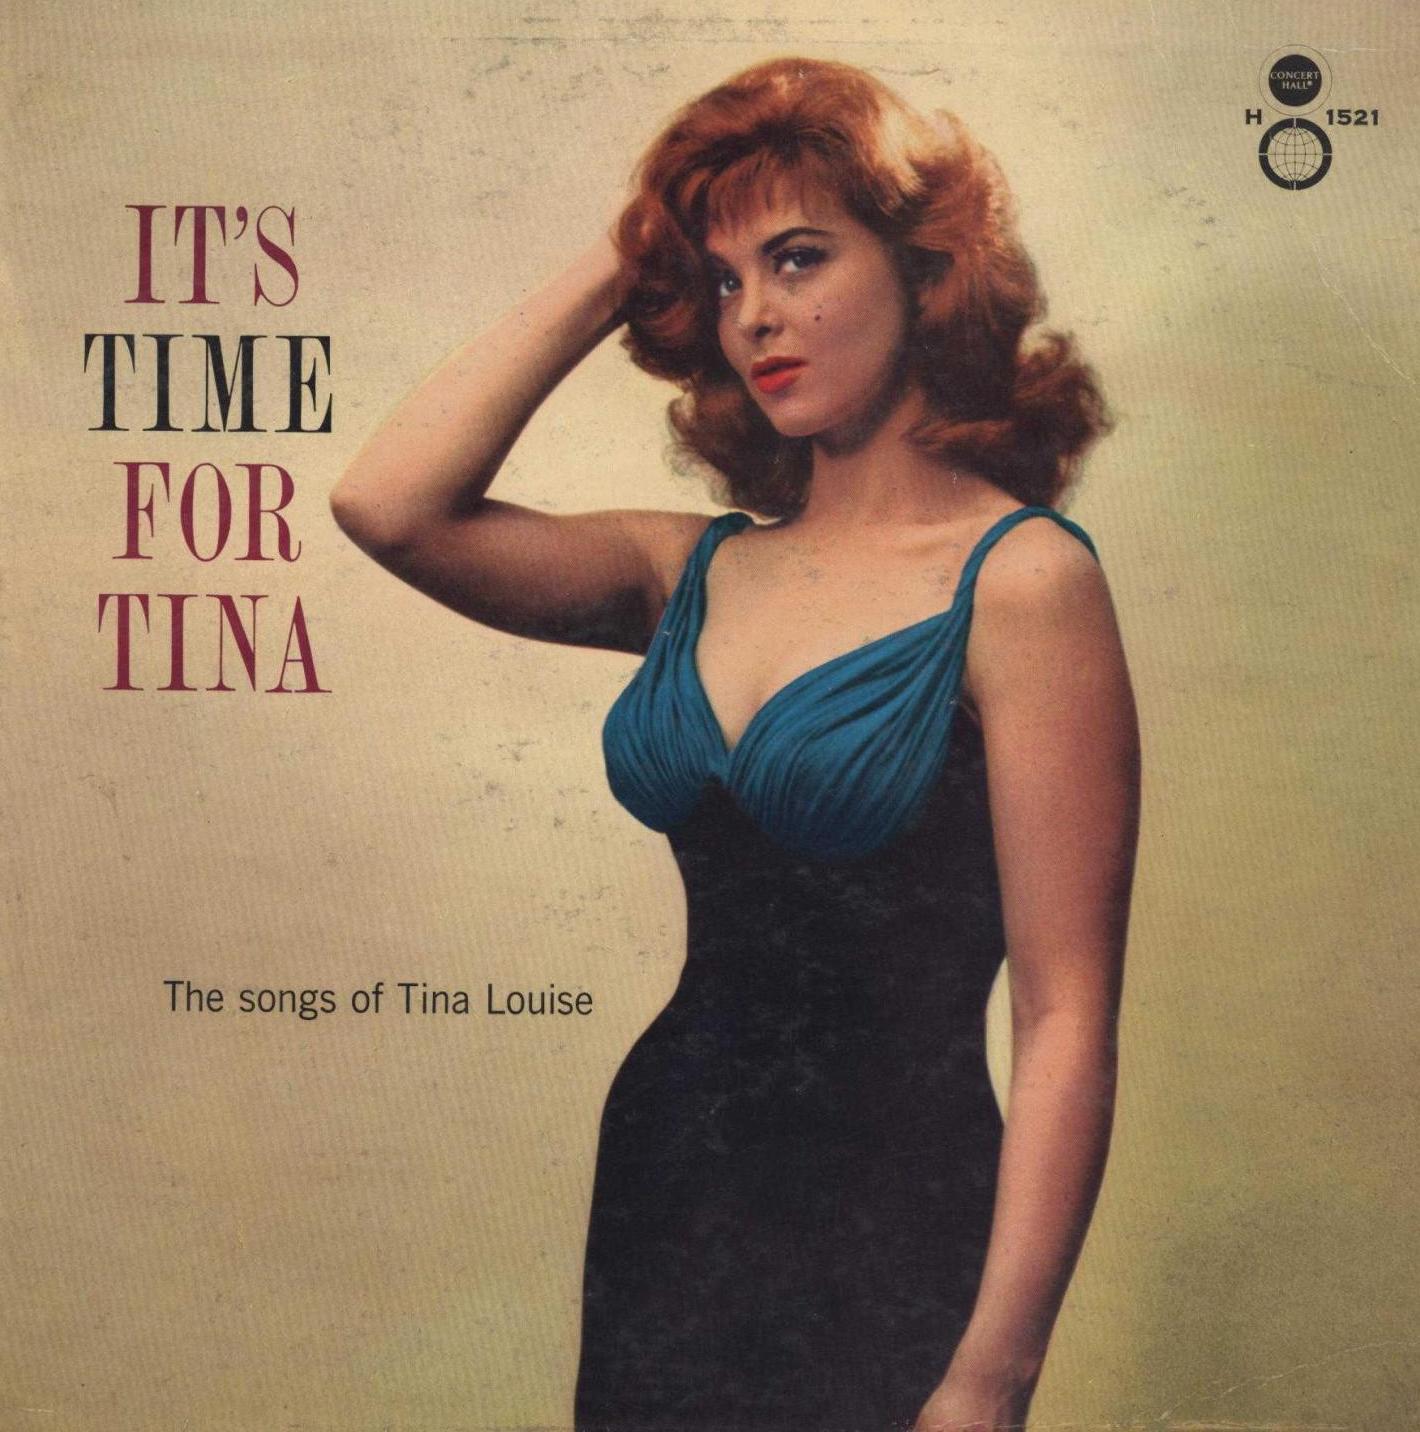 Tina Louise wears a va-va-voom dress and puts her hand to her red hair next to the title IT'S TIME FOR TINA and the subhead "The Songs of Tina Louise."